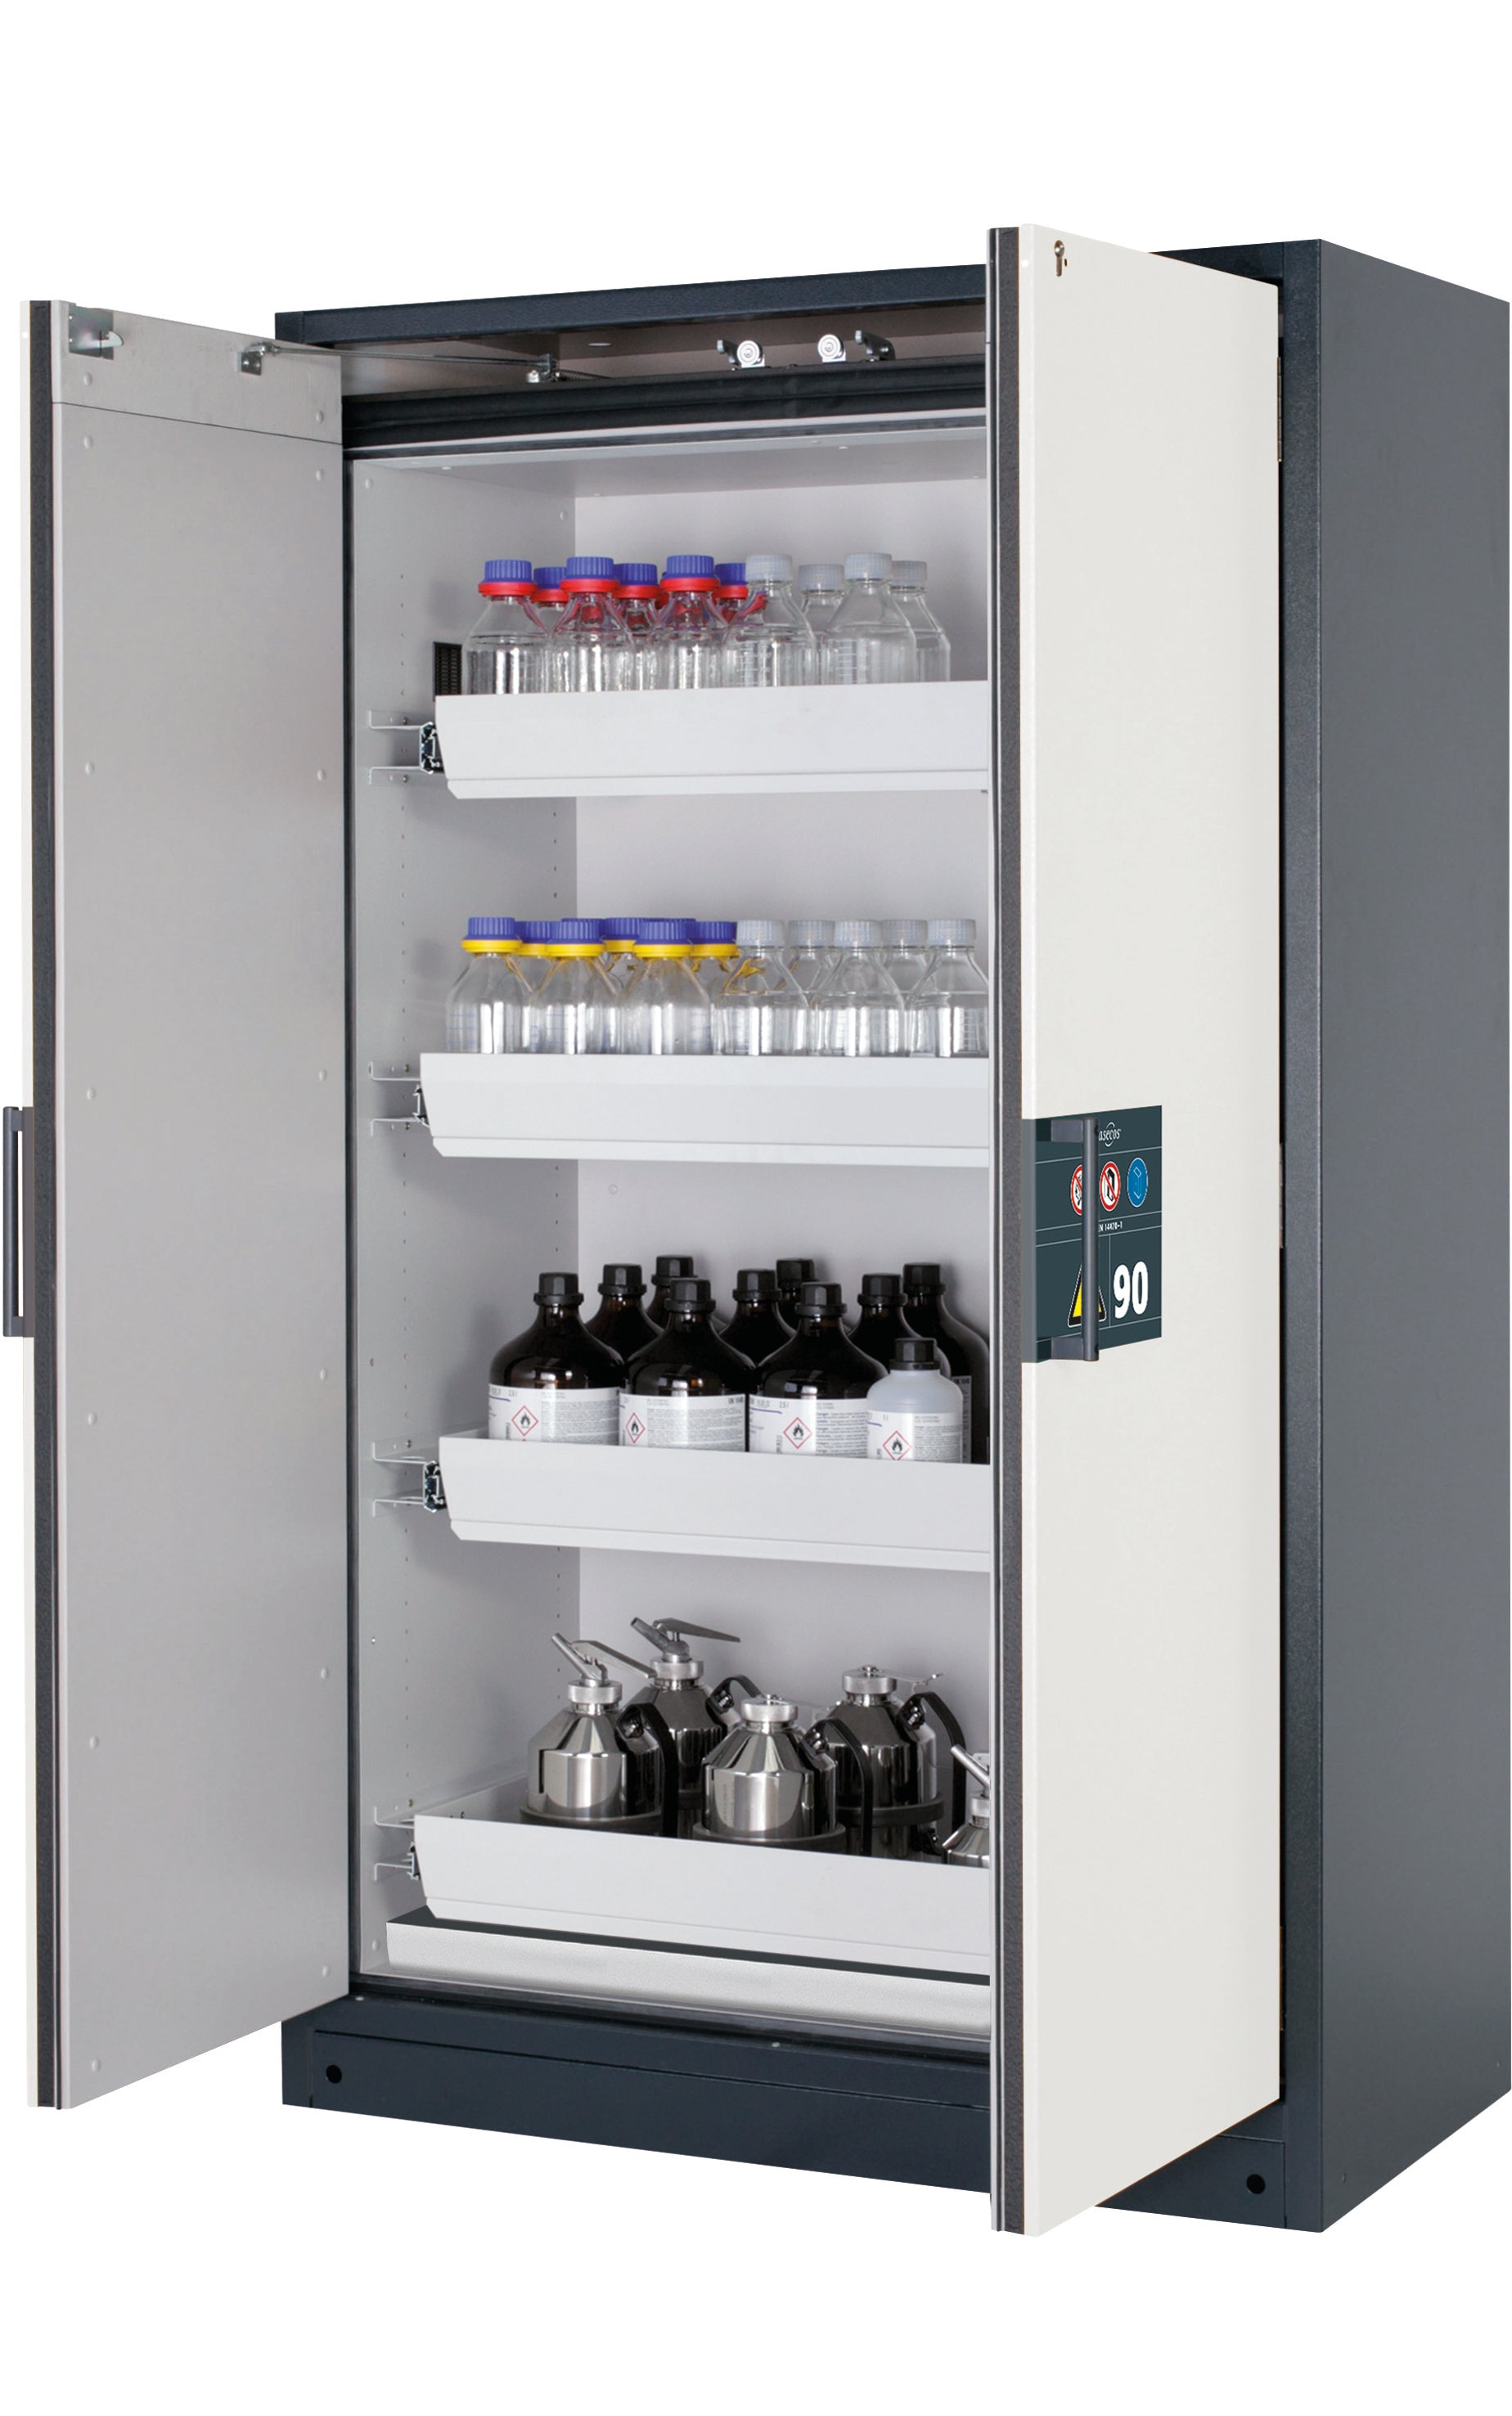 Type 90 safety storage cabinet Q-CLASSIC-90 model Q90.195.120 in pure white RAL 9010 with 4x drawer (standard) (sheet steel),